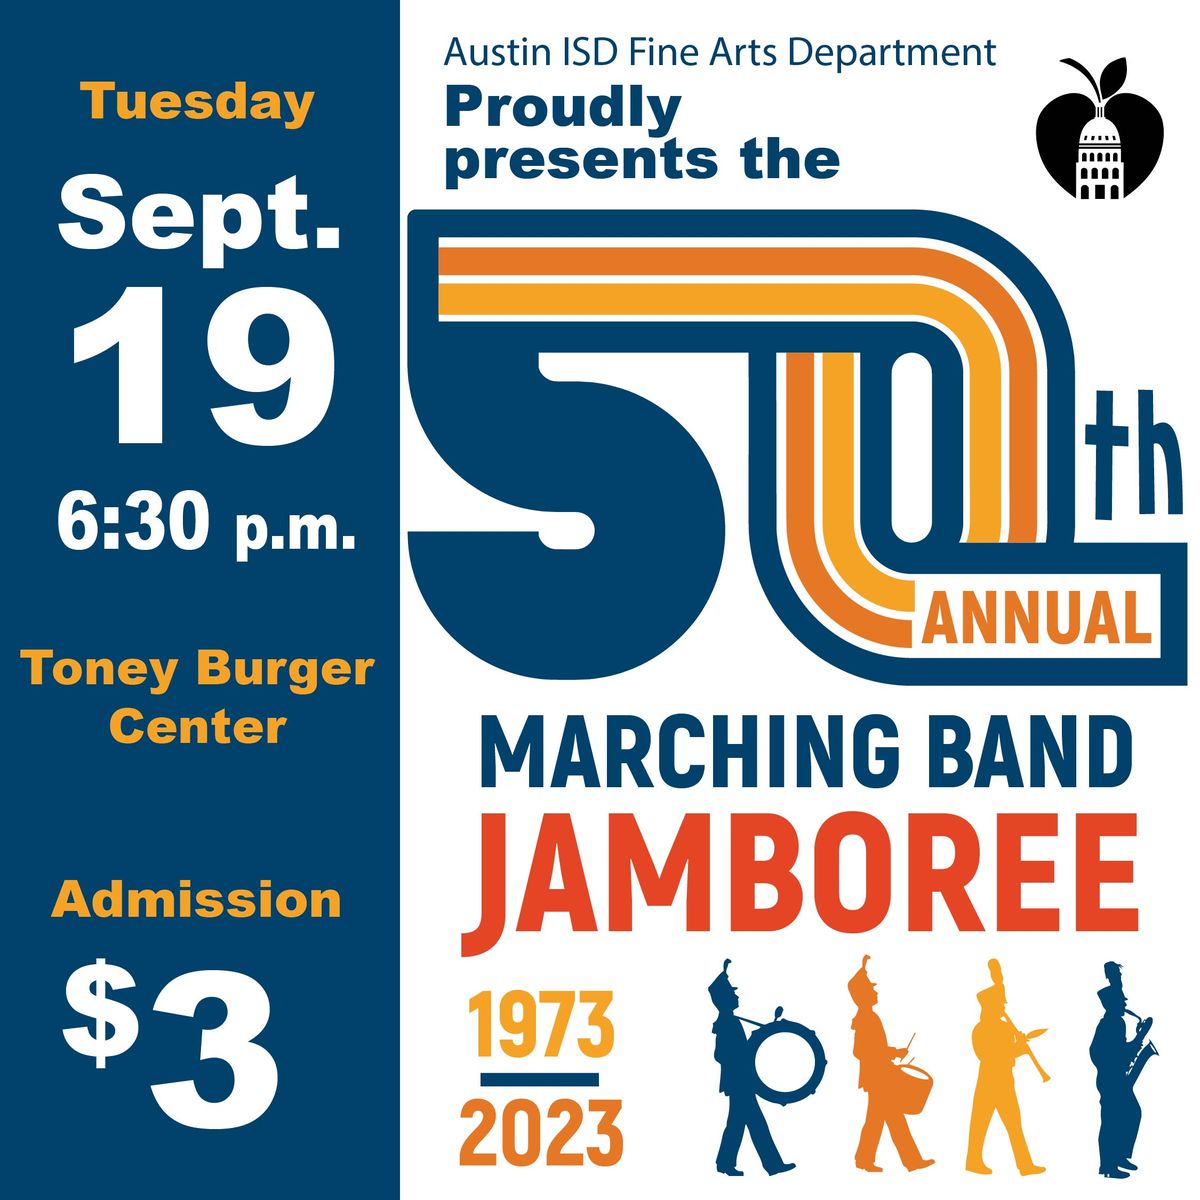 50th Annual Marching Band Jamboree, Tuesday Sept. 19, 6:30 p.m. Toney Burger Center, $3 admission